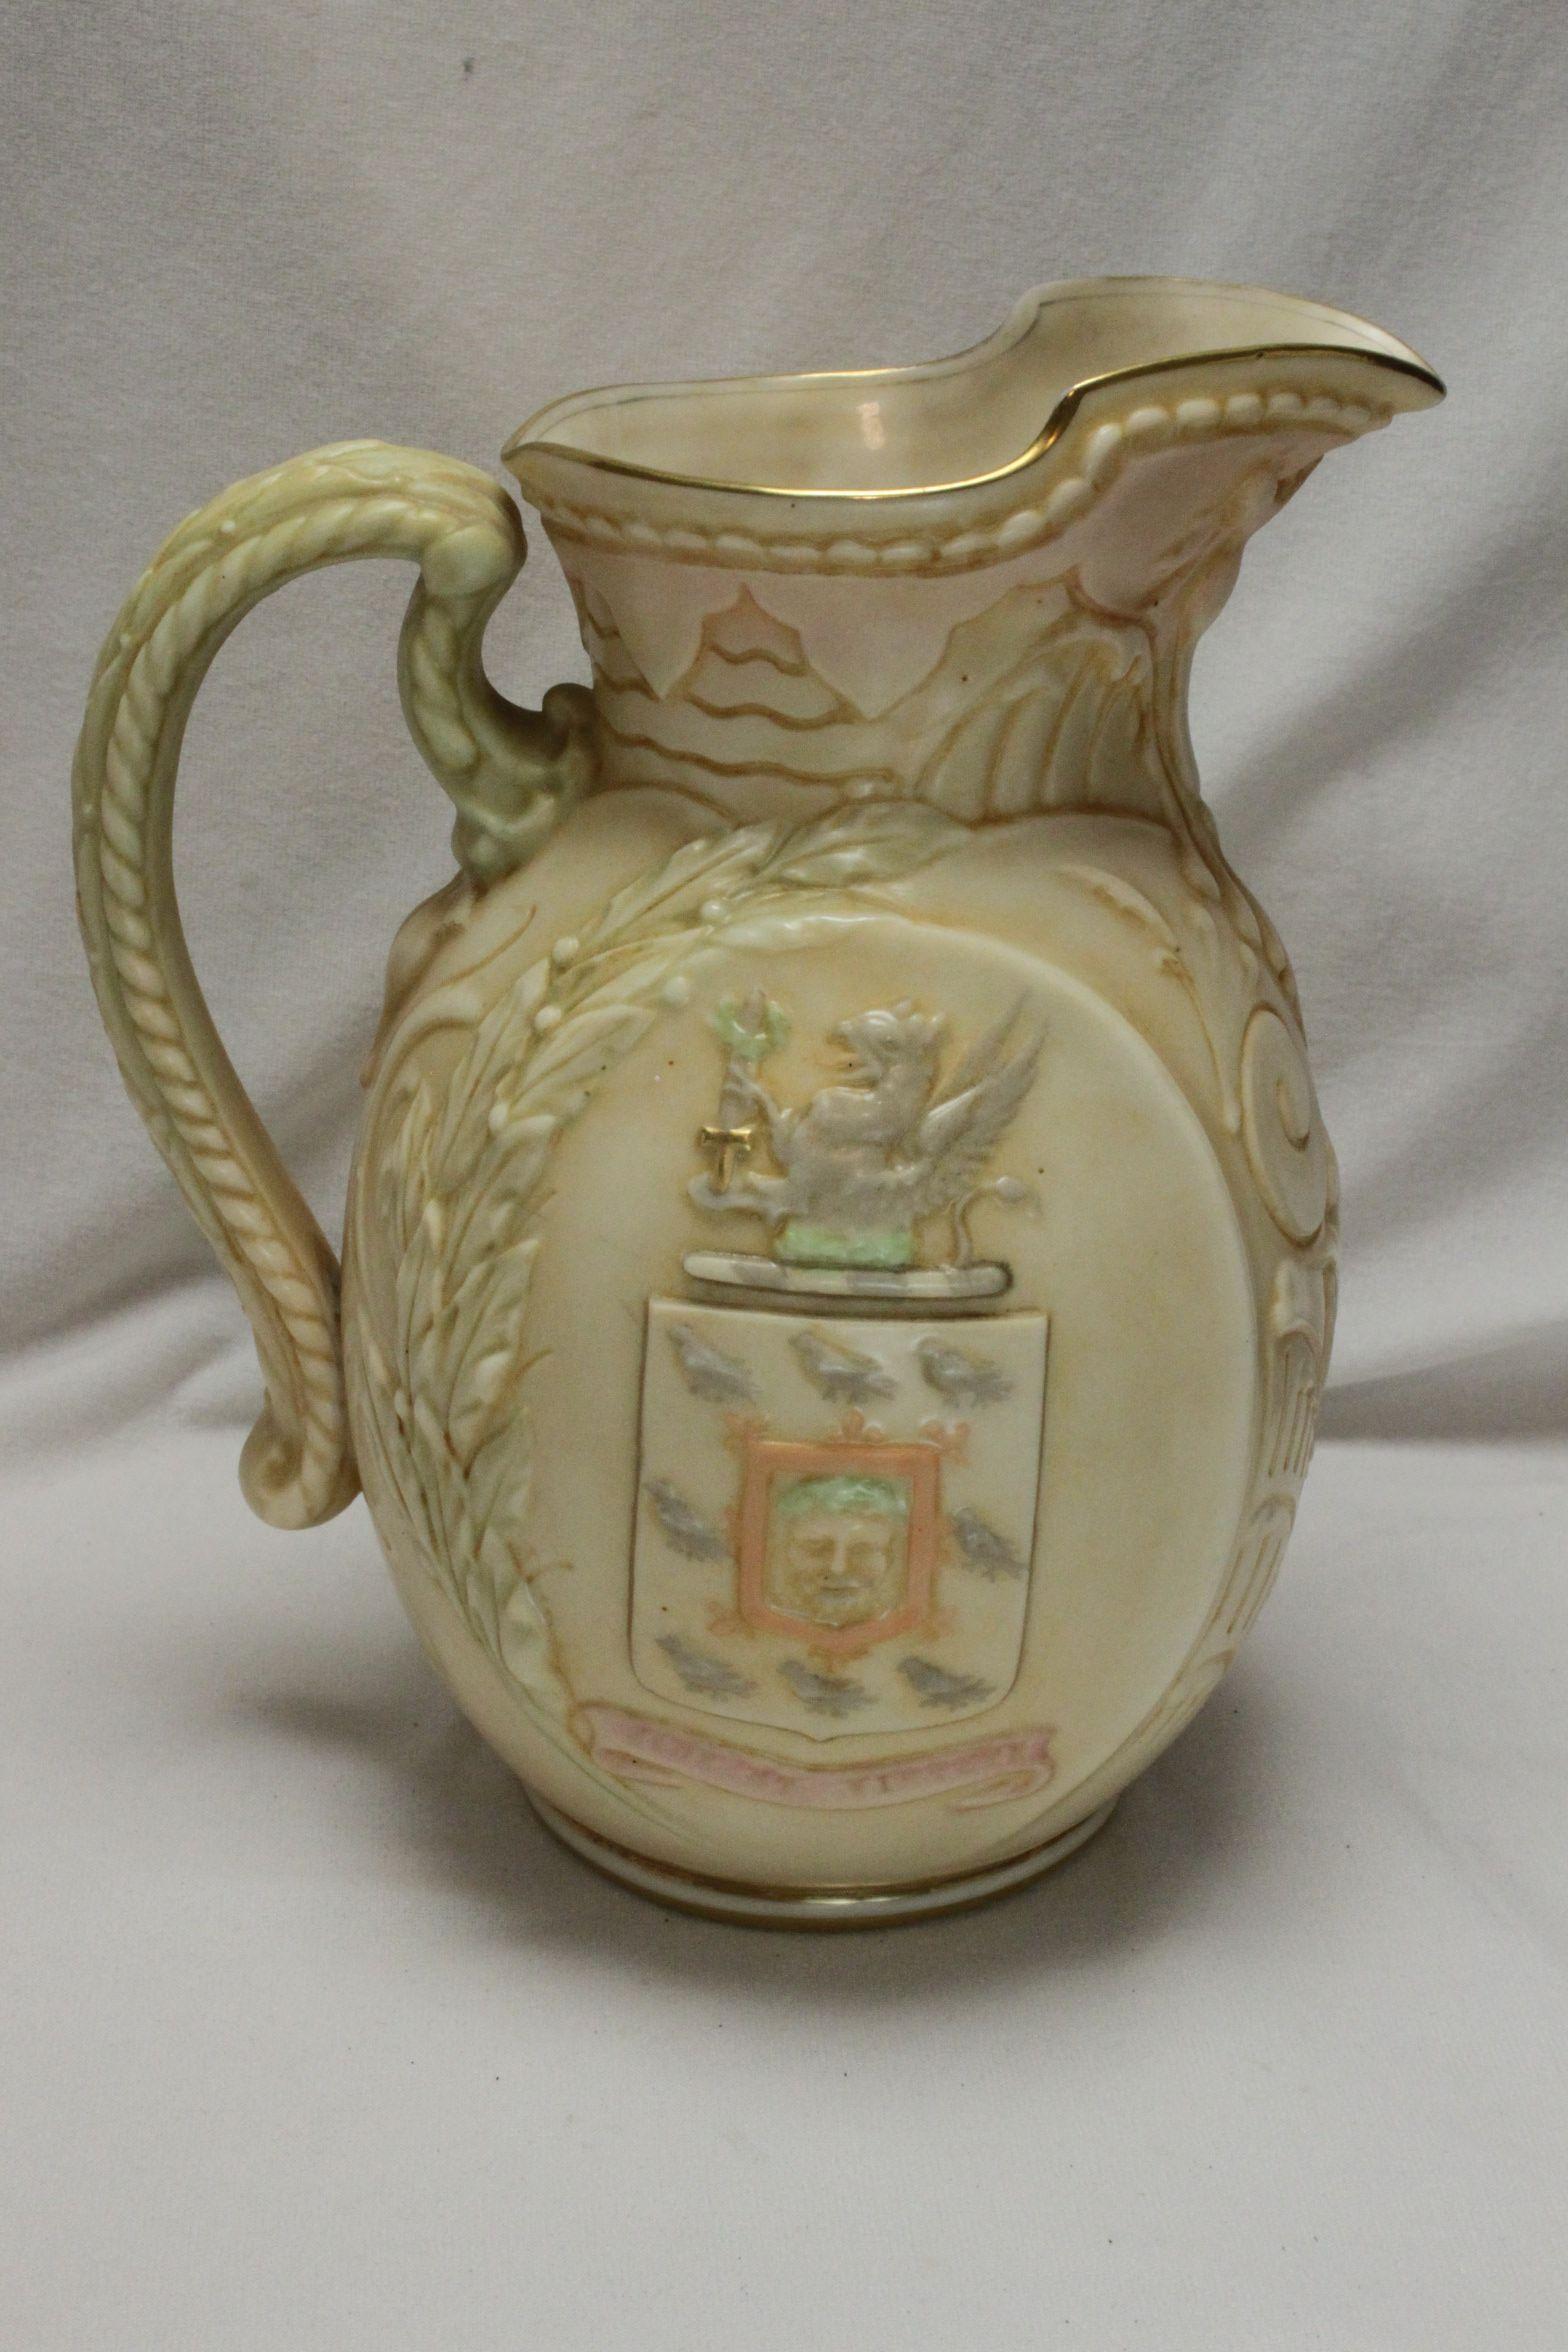 This Doulton Burslem jug was issued in 1898 to commemorate the death of William Ewart Gladstone (1809-1898). Gladstone was an English politician who served as Prime Minister on four occasions. Made of parian, a type of porcelain, and given a vellum